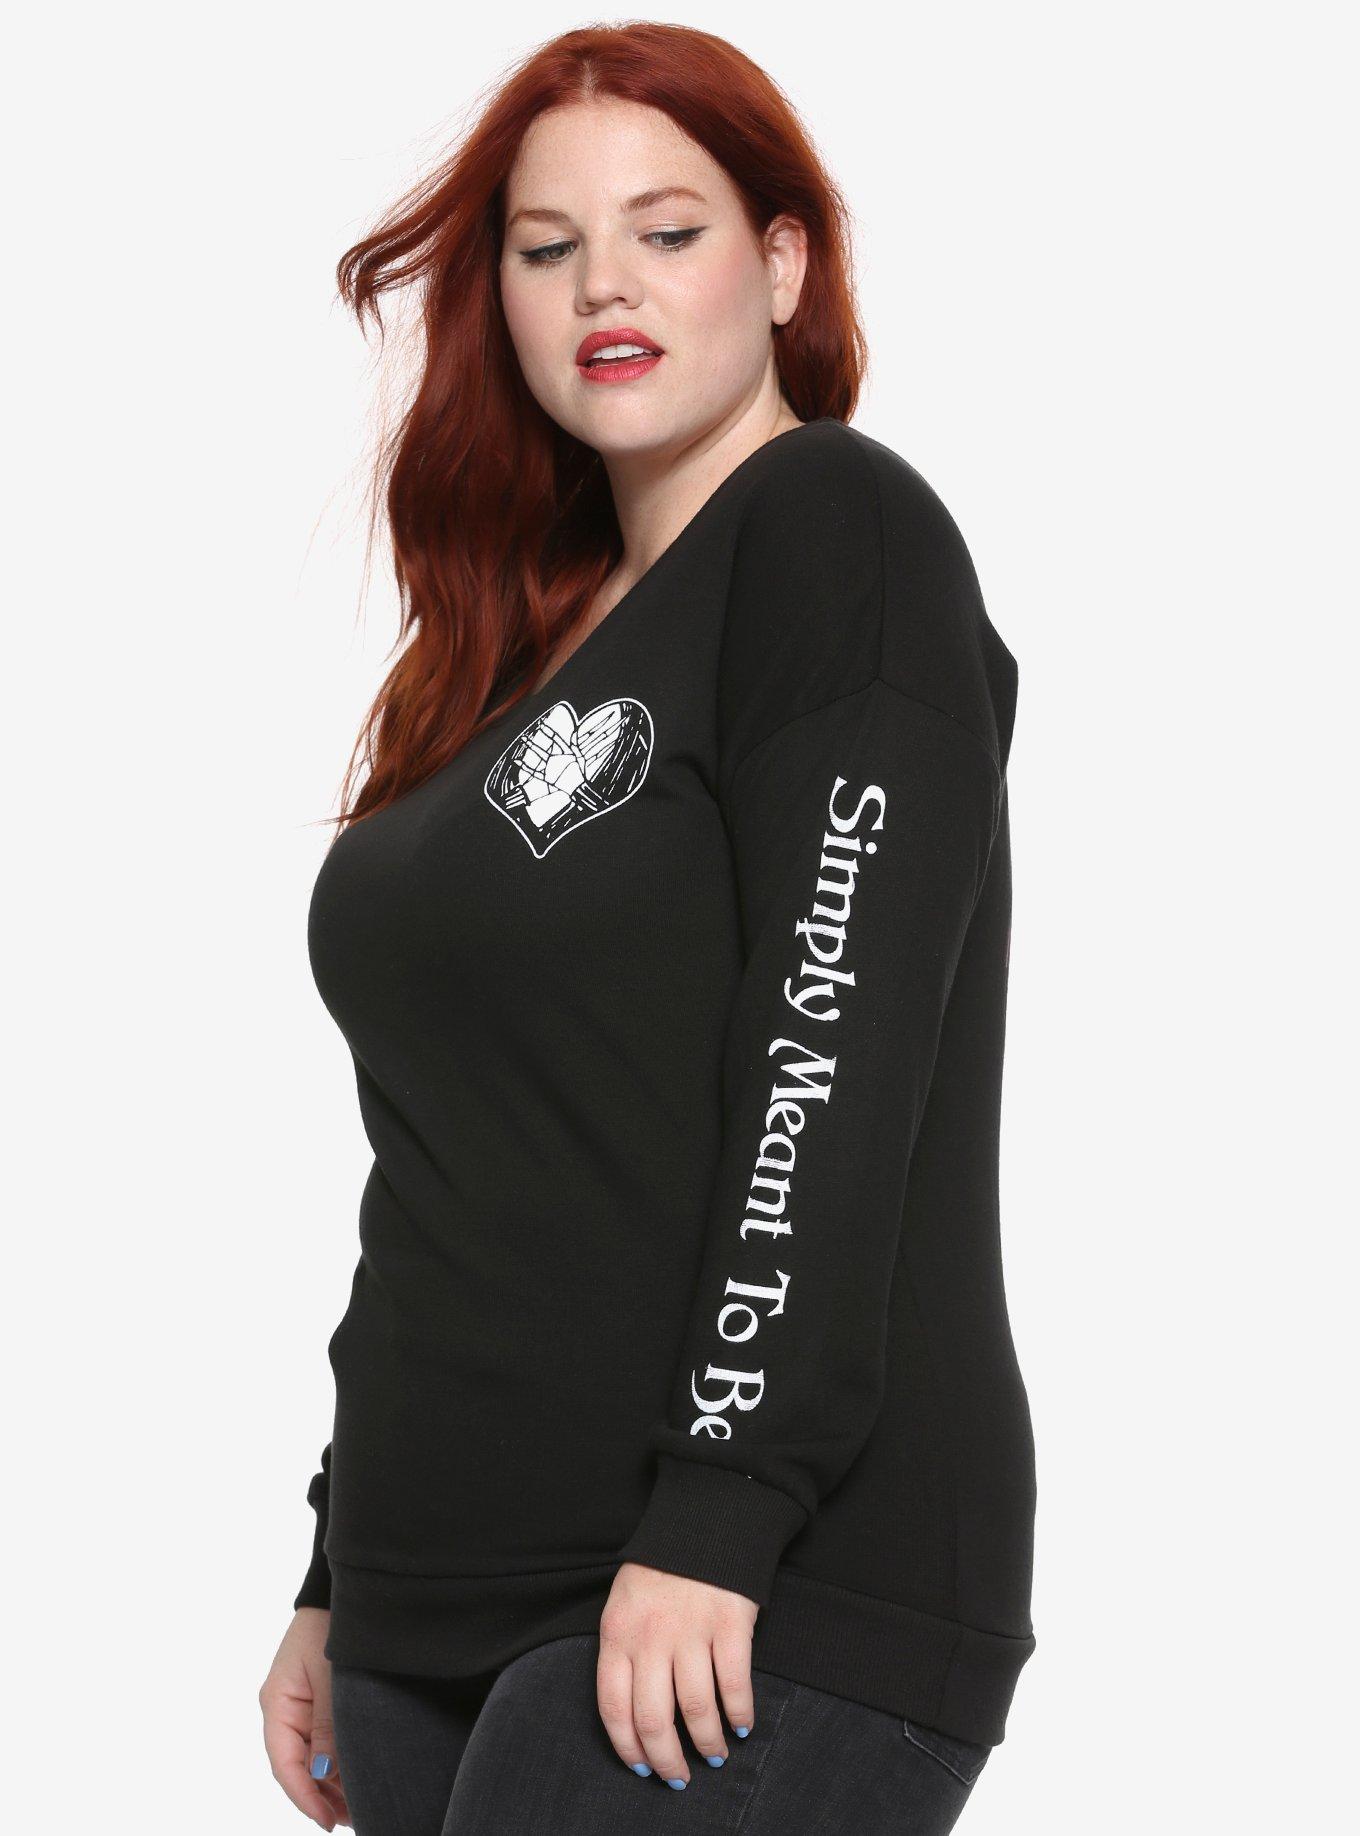 The Nightmare Before Christmas Simply Meant To Be Girls Pullover Plus Size, BLACK, hi-res